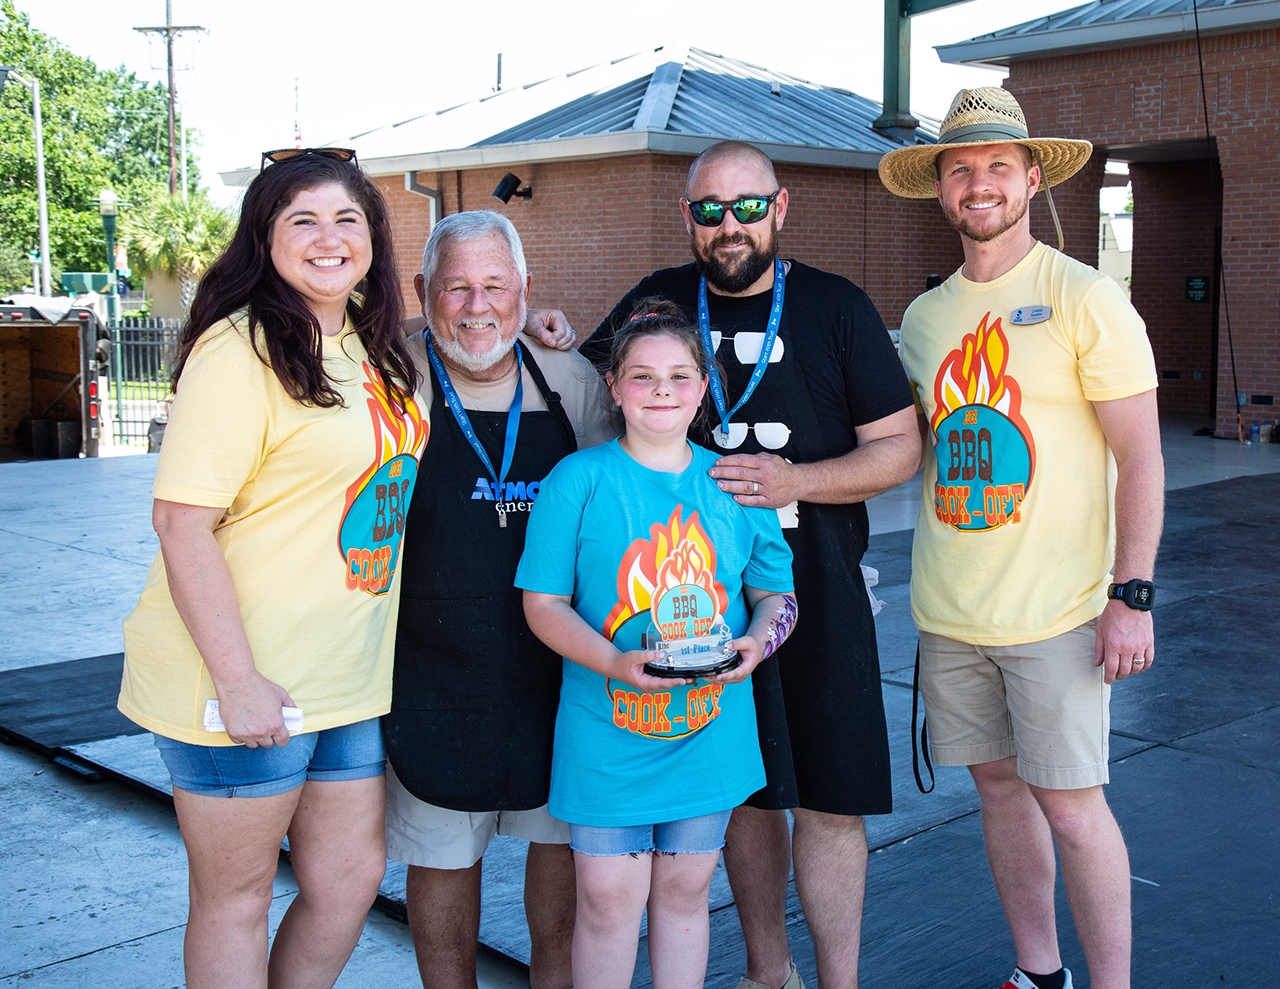 BBQ Cook-Off 1st Place Winner Ribs - Smokin' Beau's Photo with CEO and COO BBB Acadiana